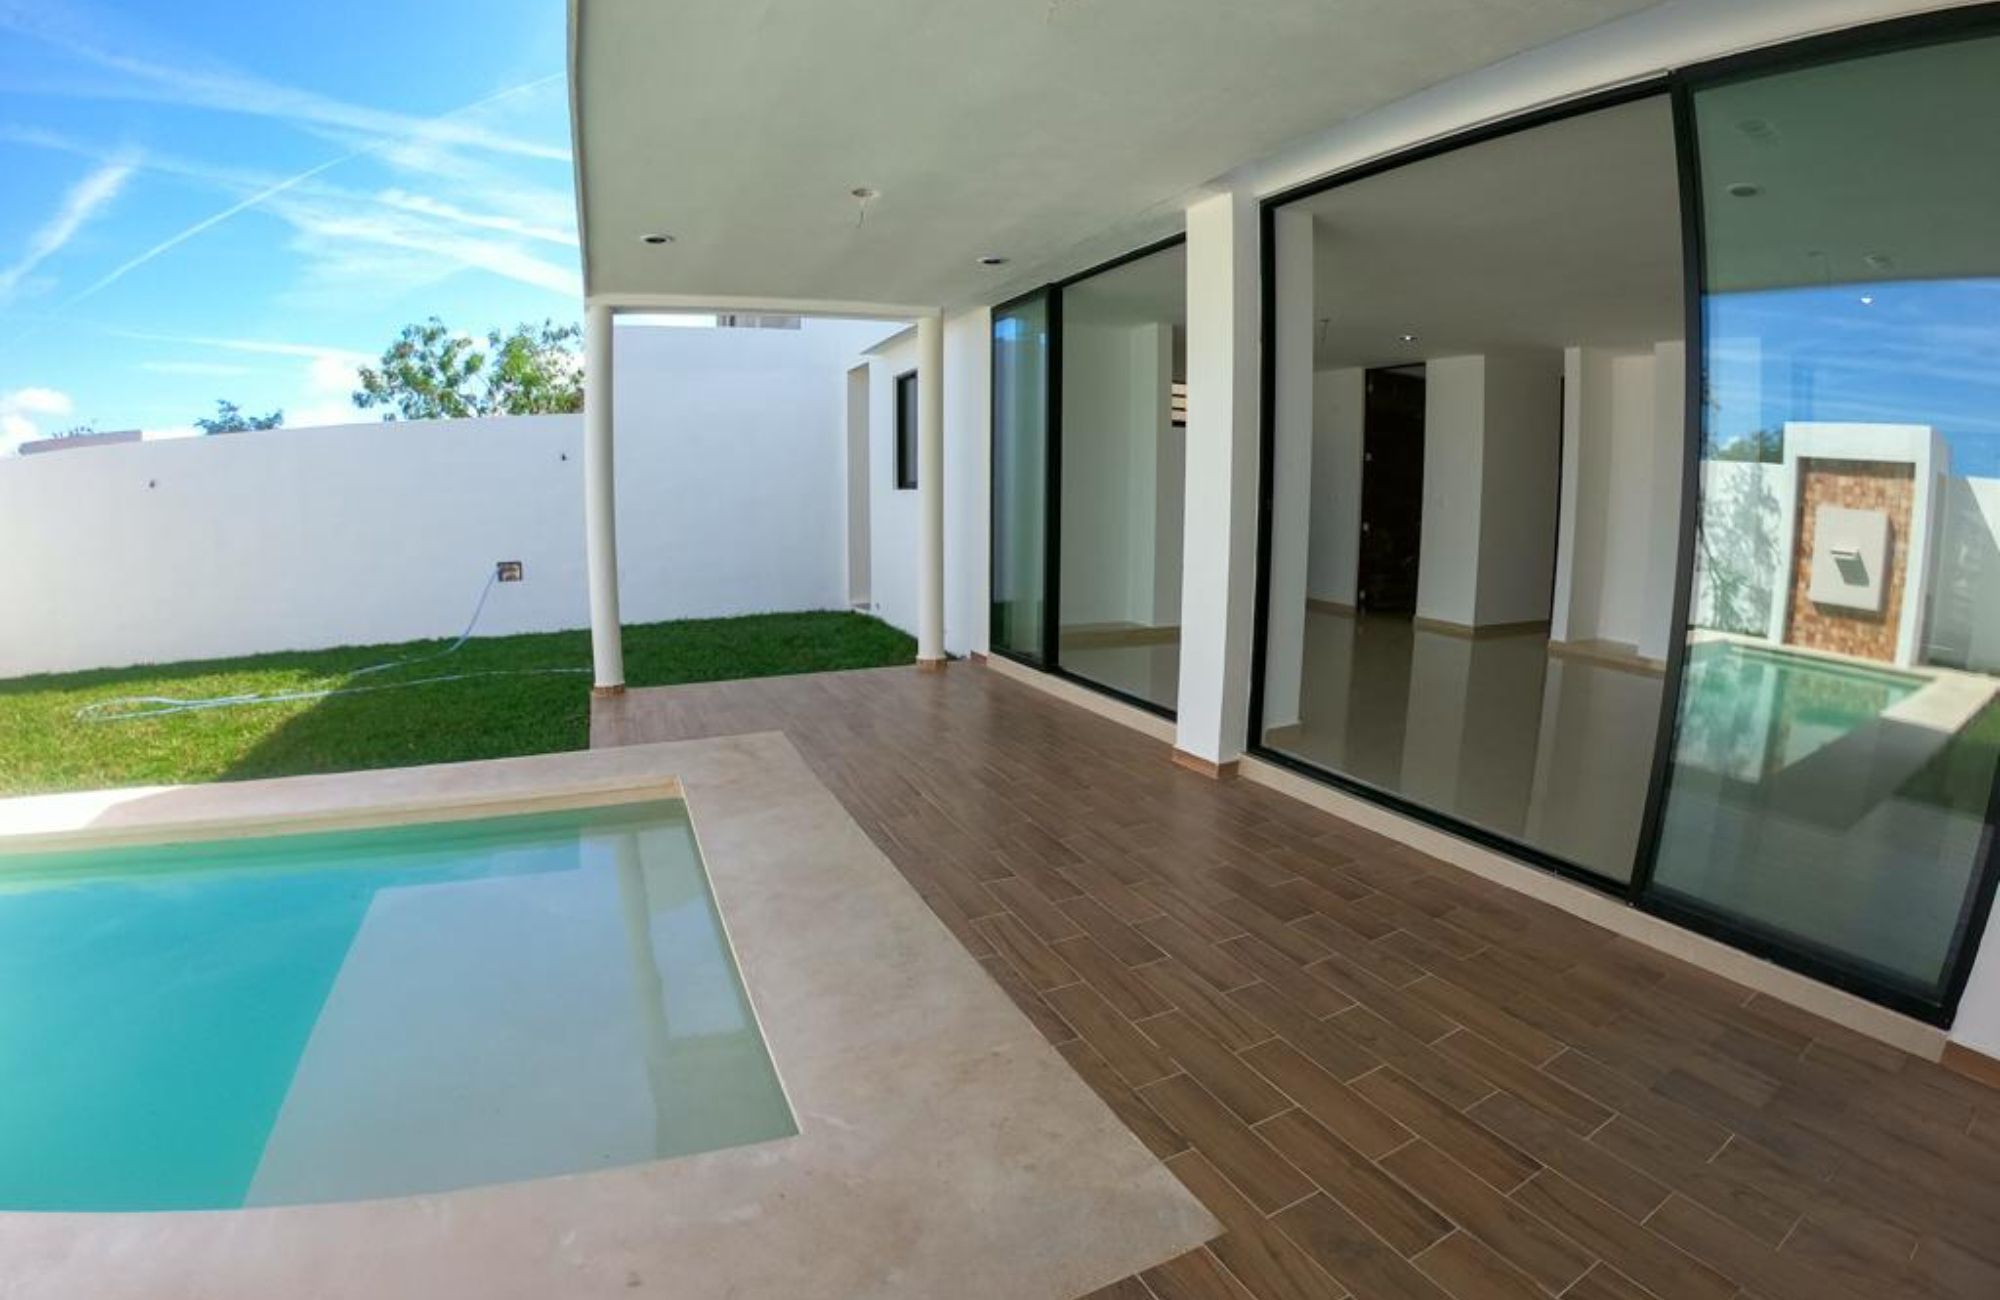 House with pool, solar panel, clubhouse with amenities, for sale Cholul Merida